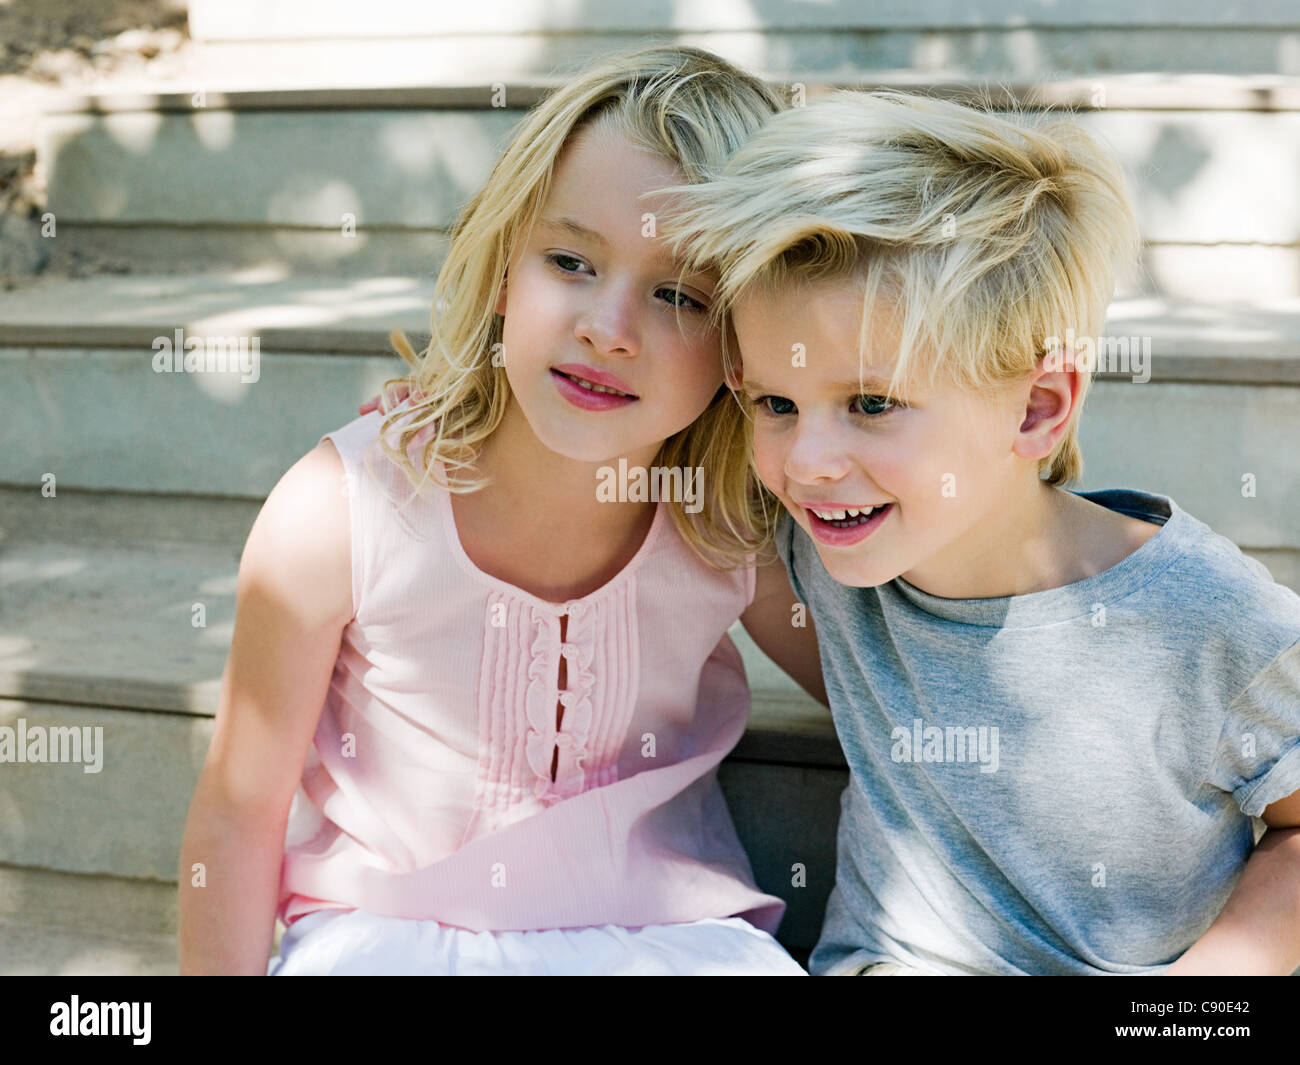 Brother and sister sitting on wooden steps Stock Photo